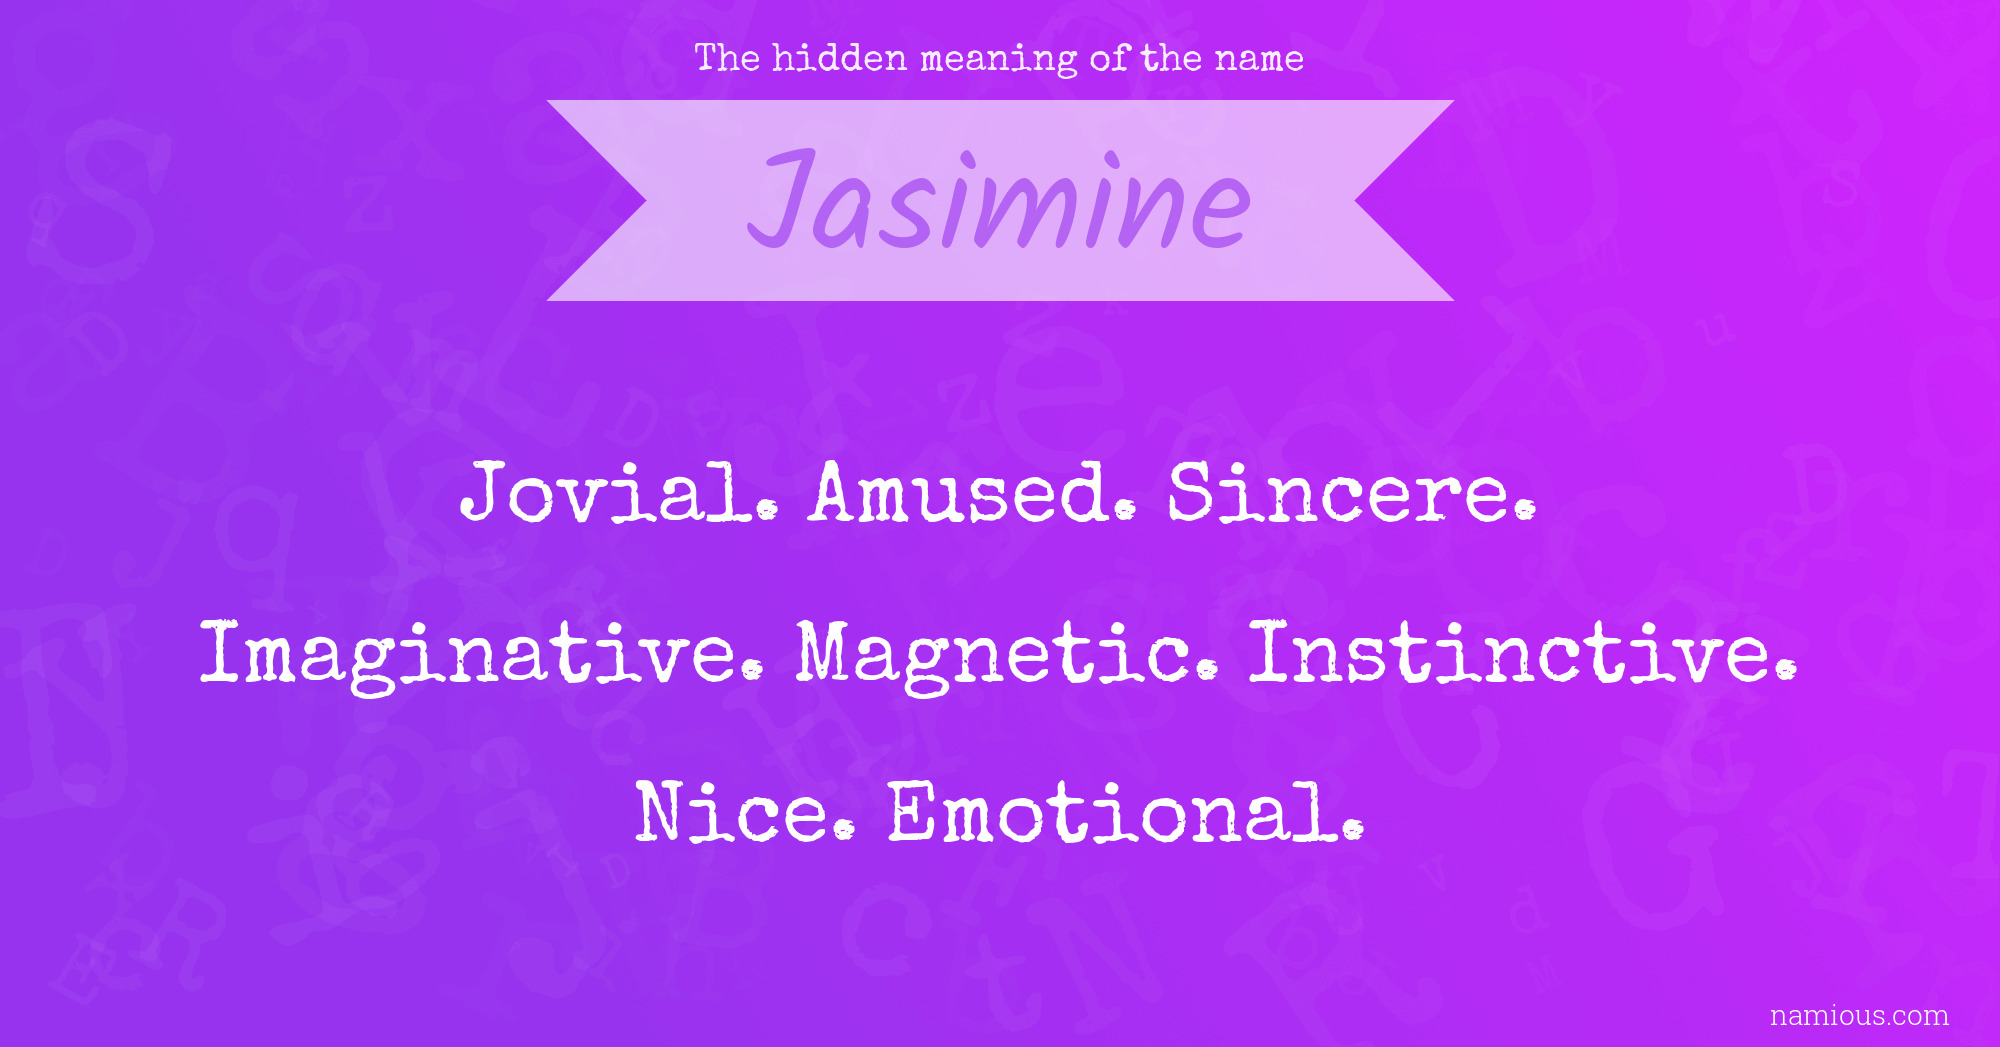 The hidden meaning of the name Jasimine